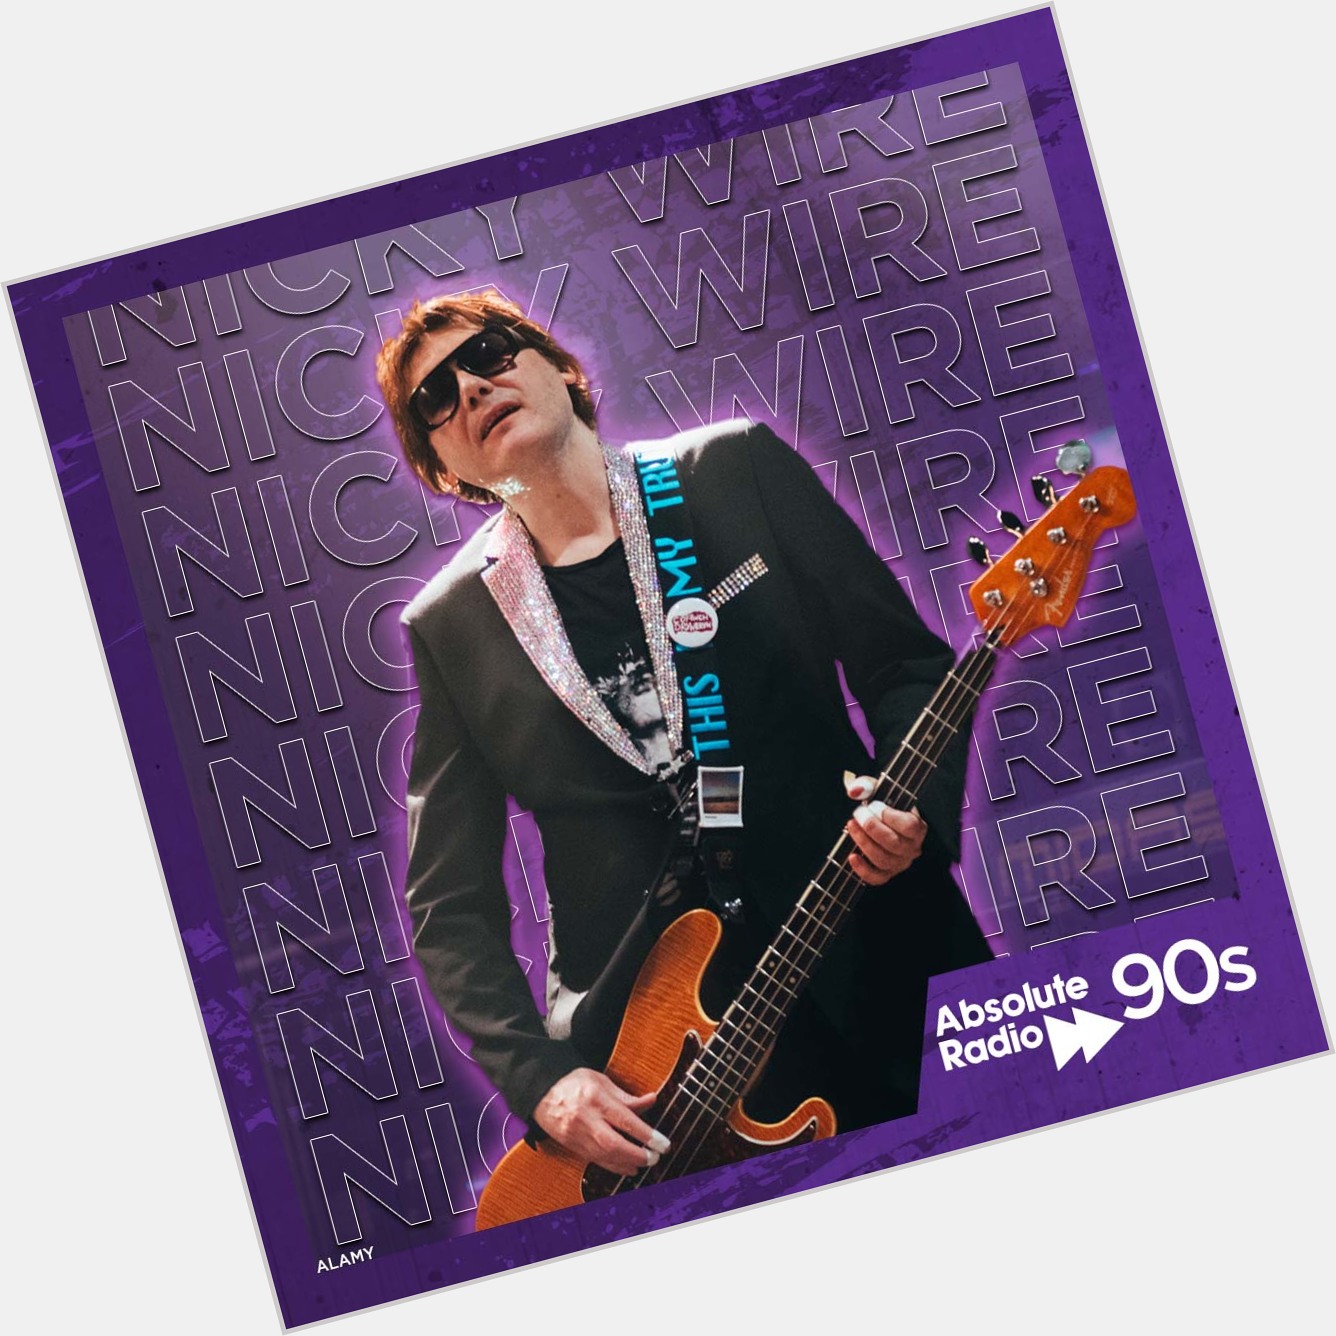 Happy birthday to Nicky Wire!

The legendary Manic Street Preachers bass player and lyricist is 53 today 